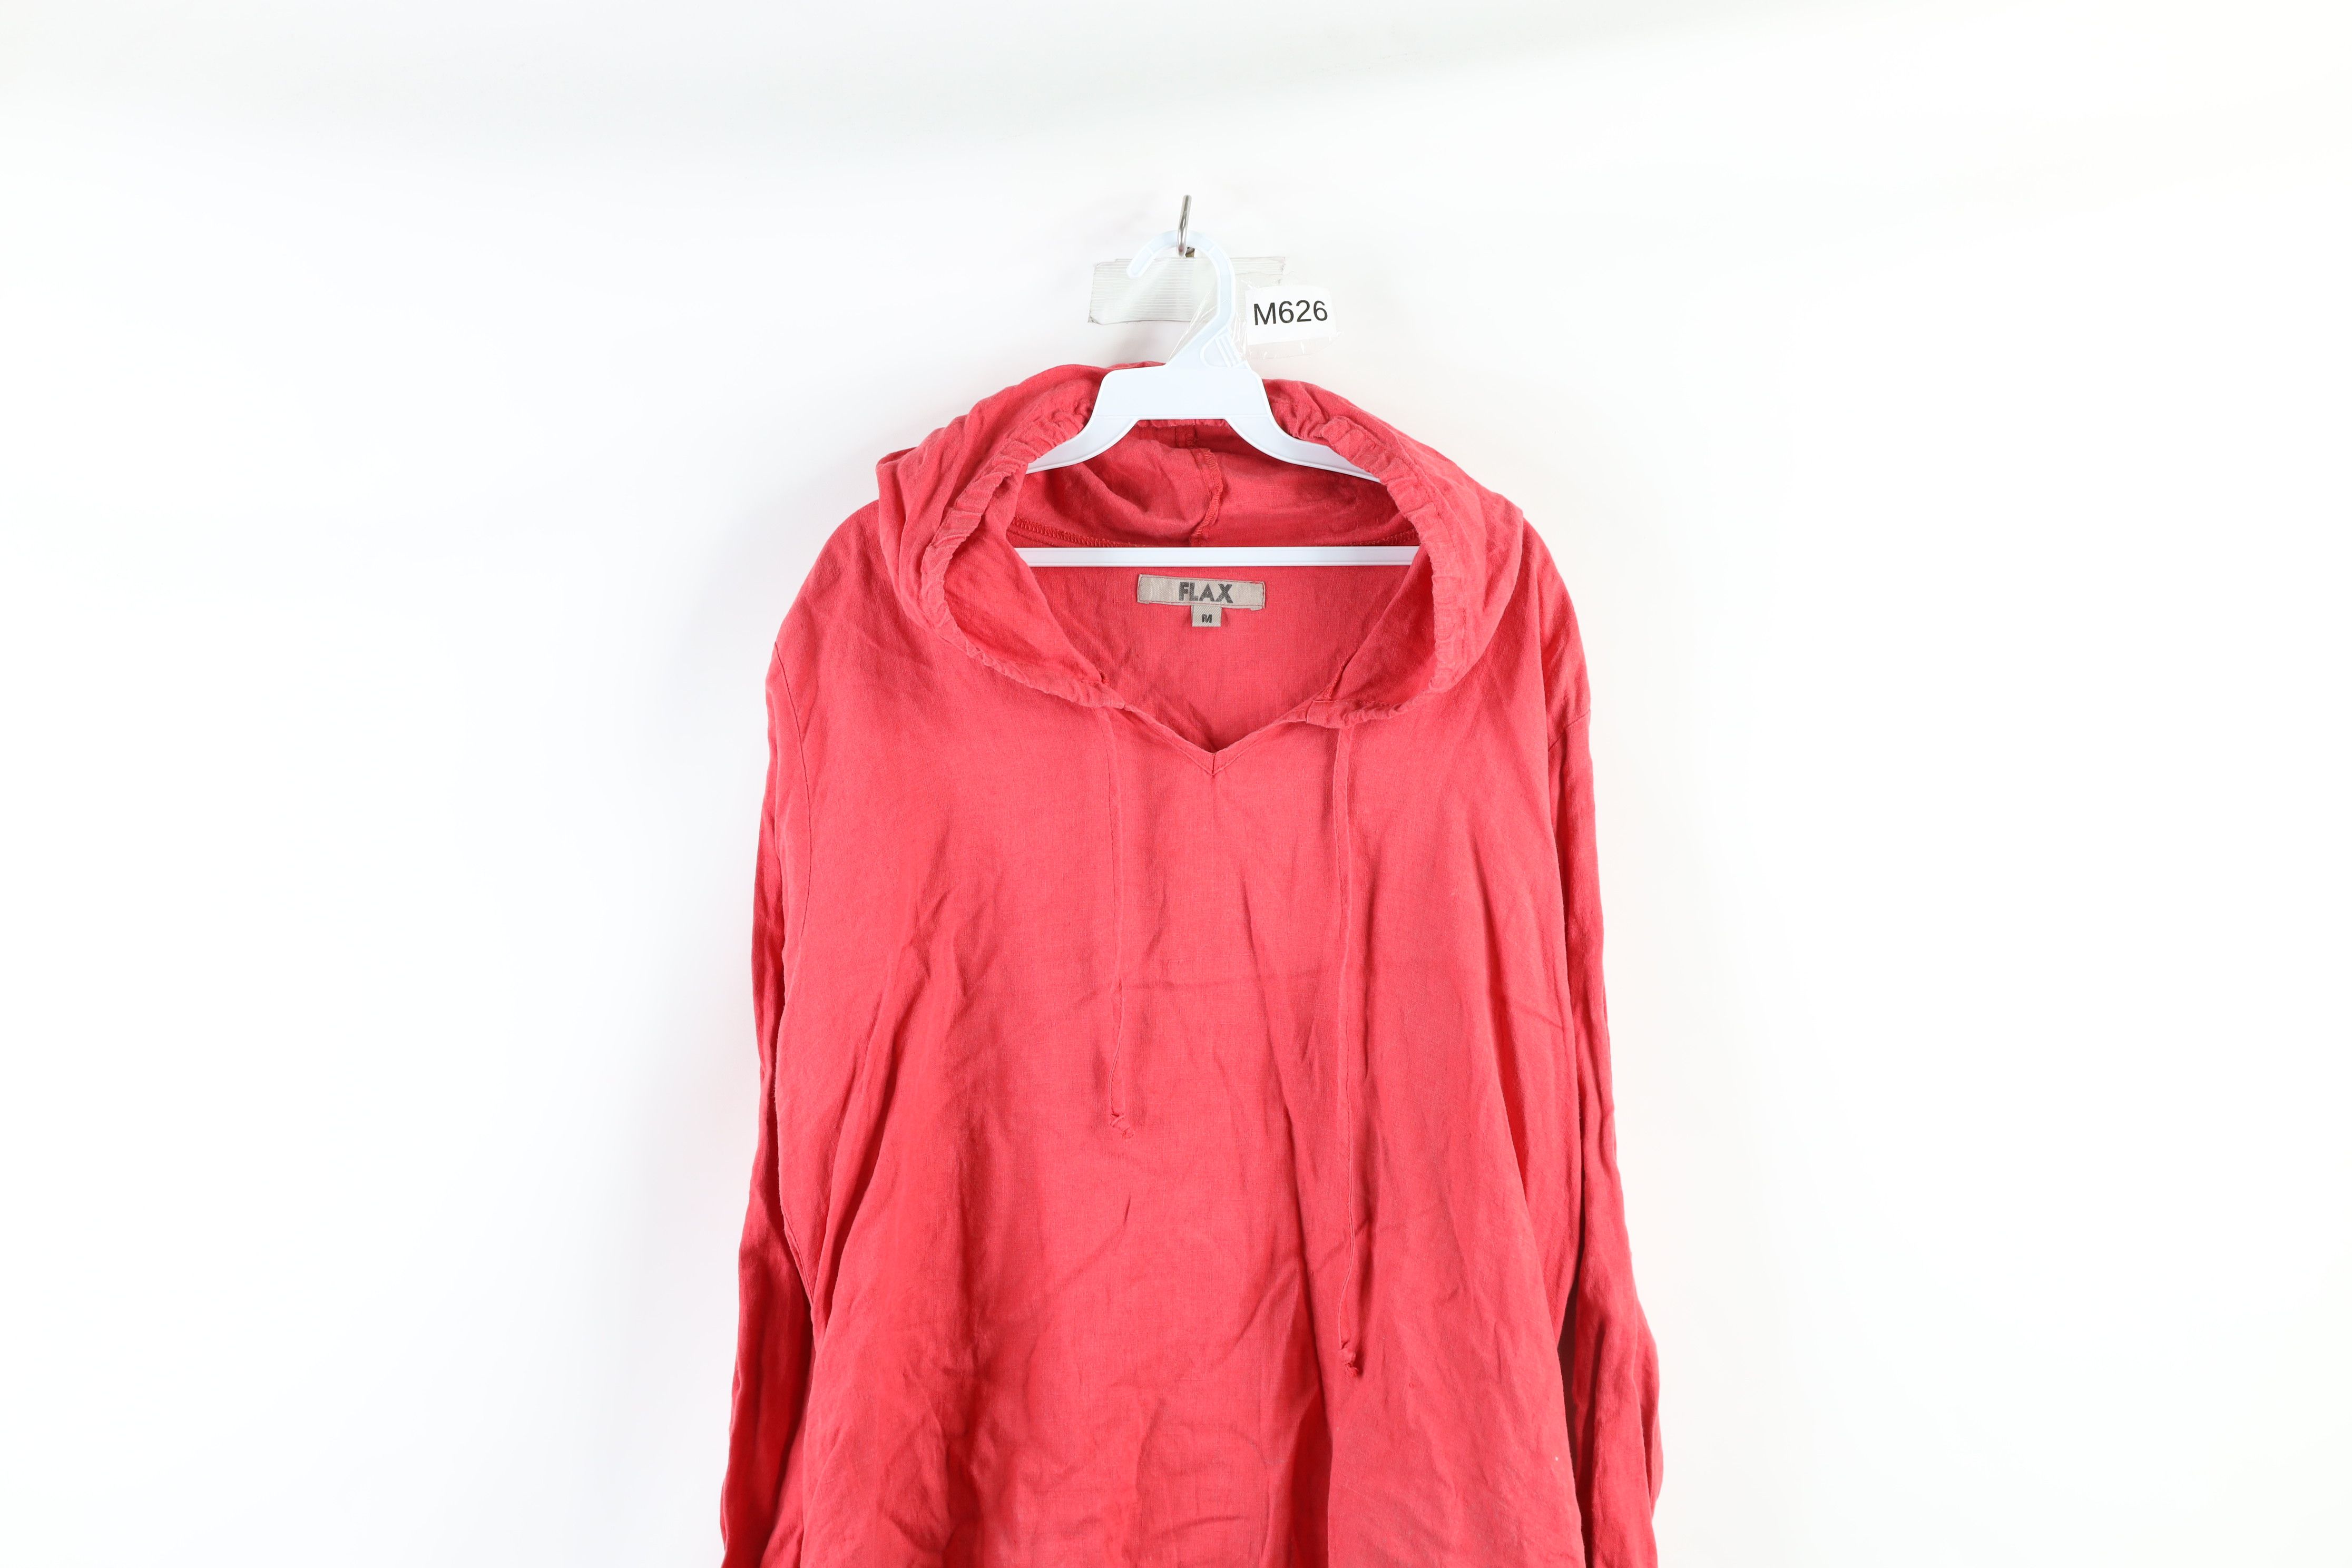 Vintage Vintage Flax Blank Lagenlook Baggy Fit Hoodie Red Linen Size M / US 6-8 / IT 42-44 - 2 Preview